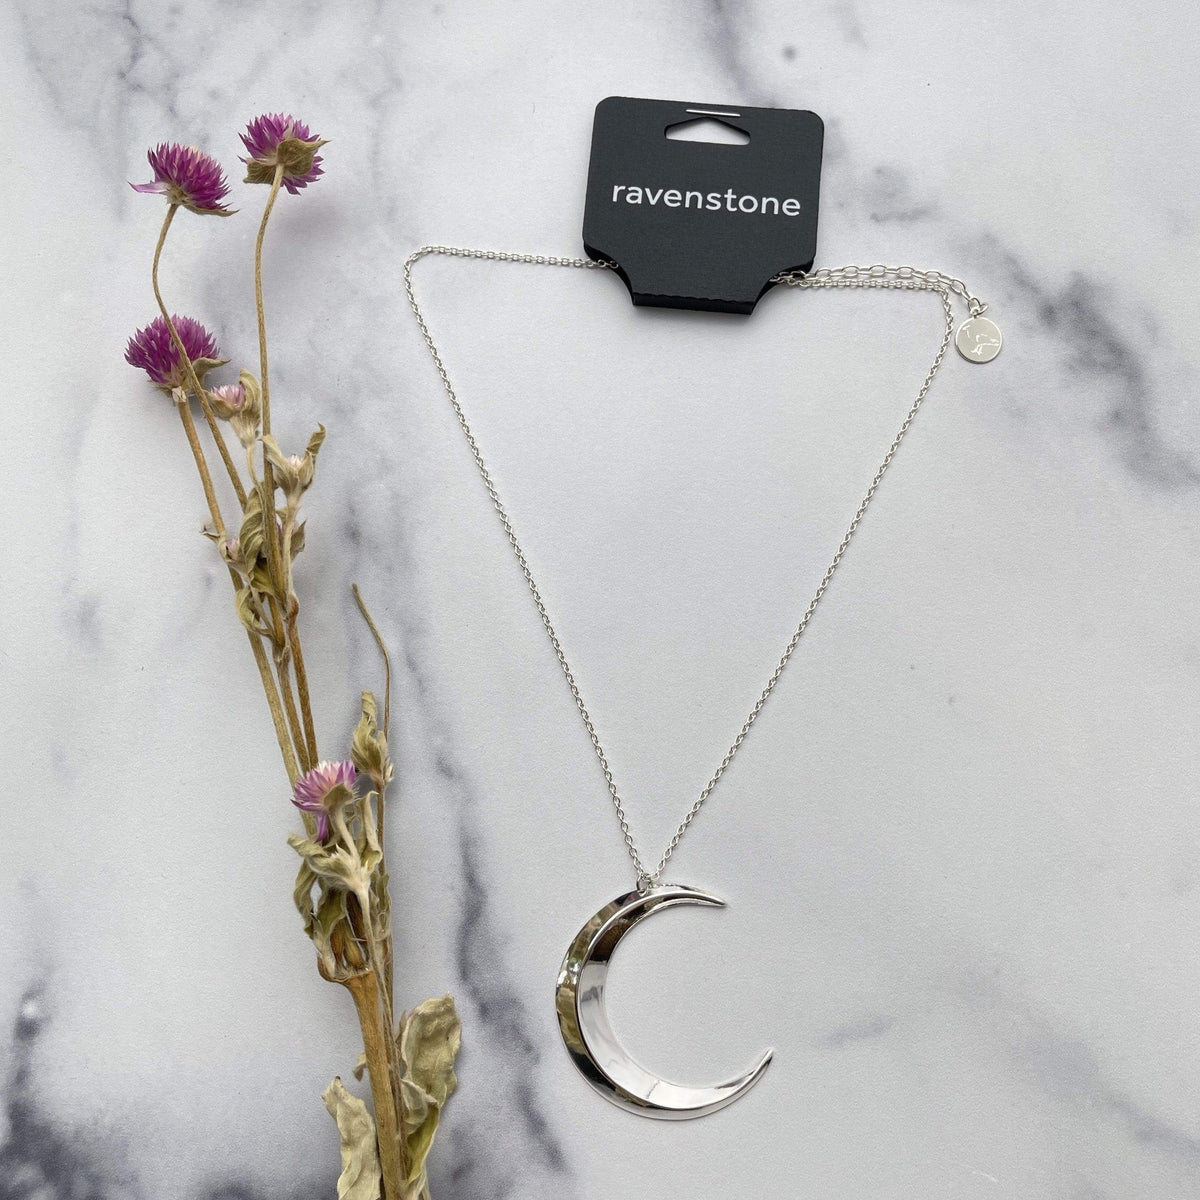 Ravenstone The Silver Crescent Moon Necklace